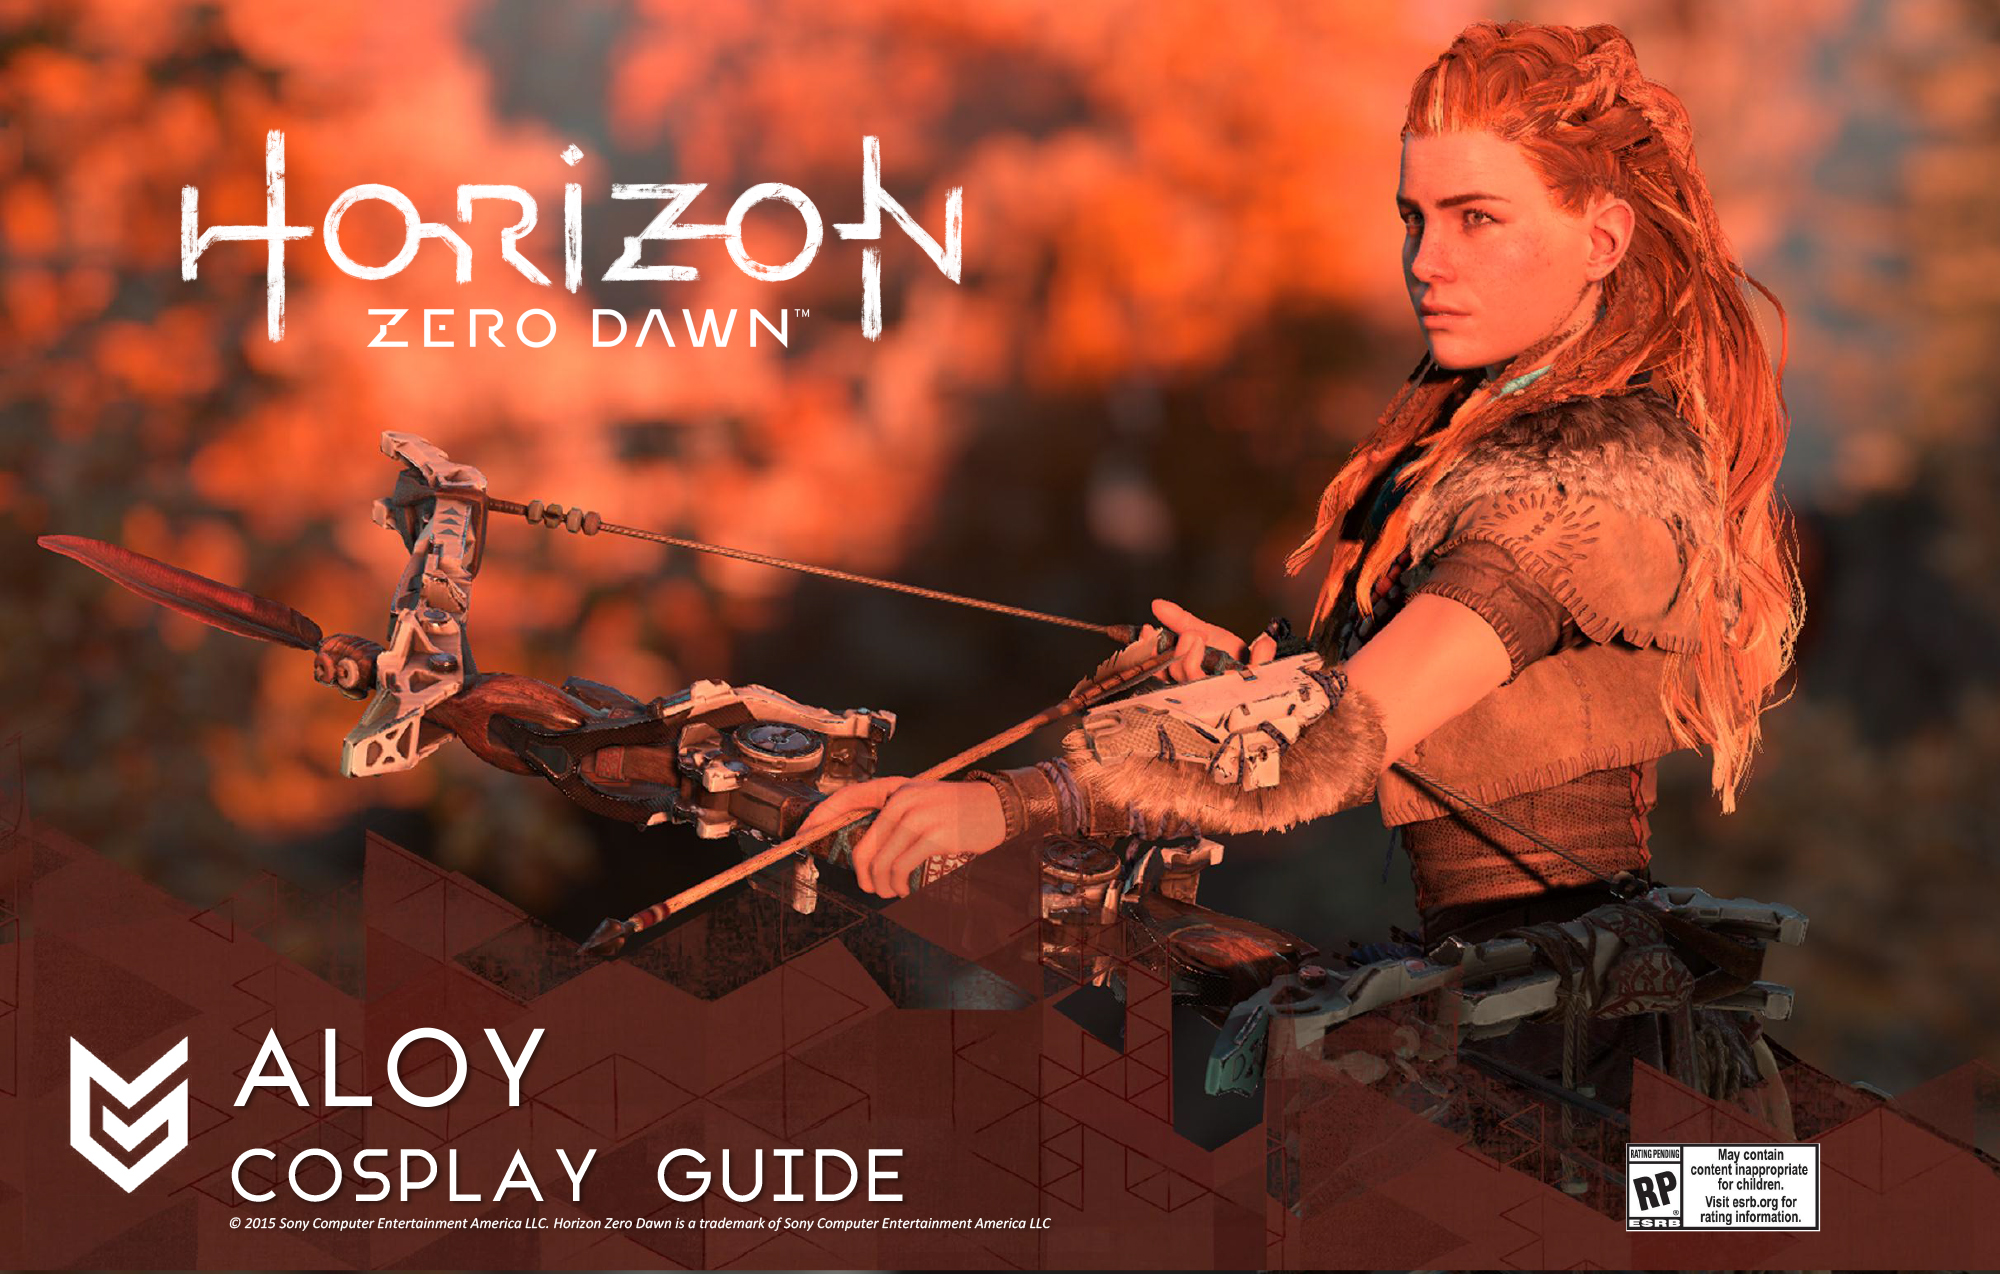 Horizon Zero Dawn Official Aloy Cosplay Guide Published